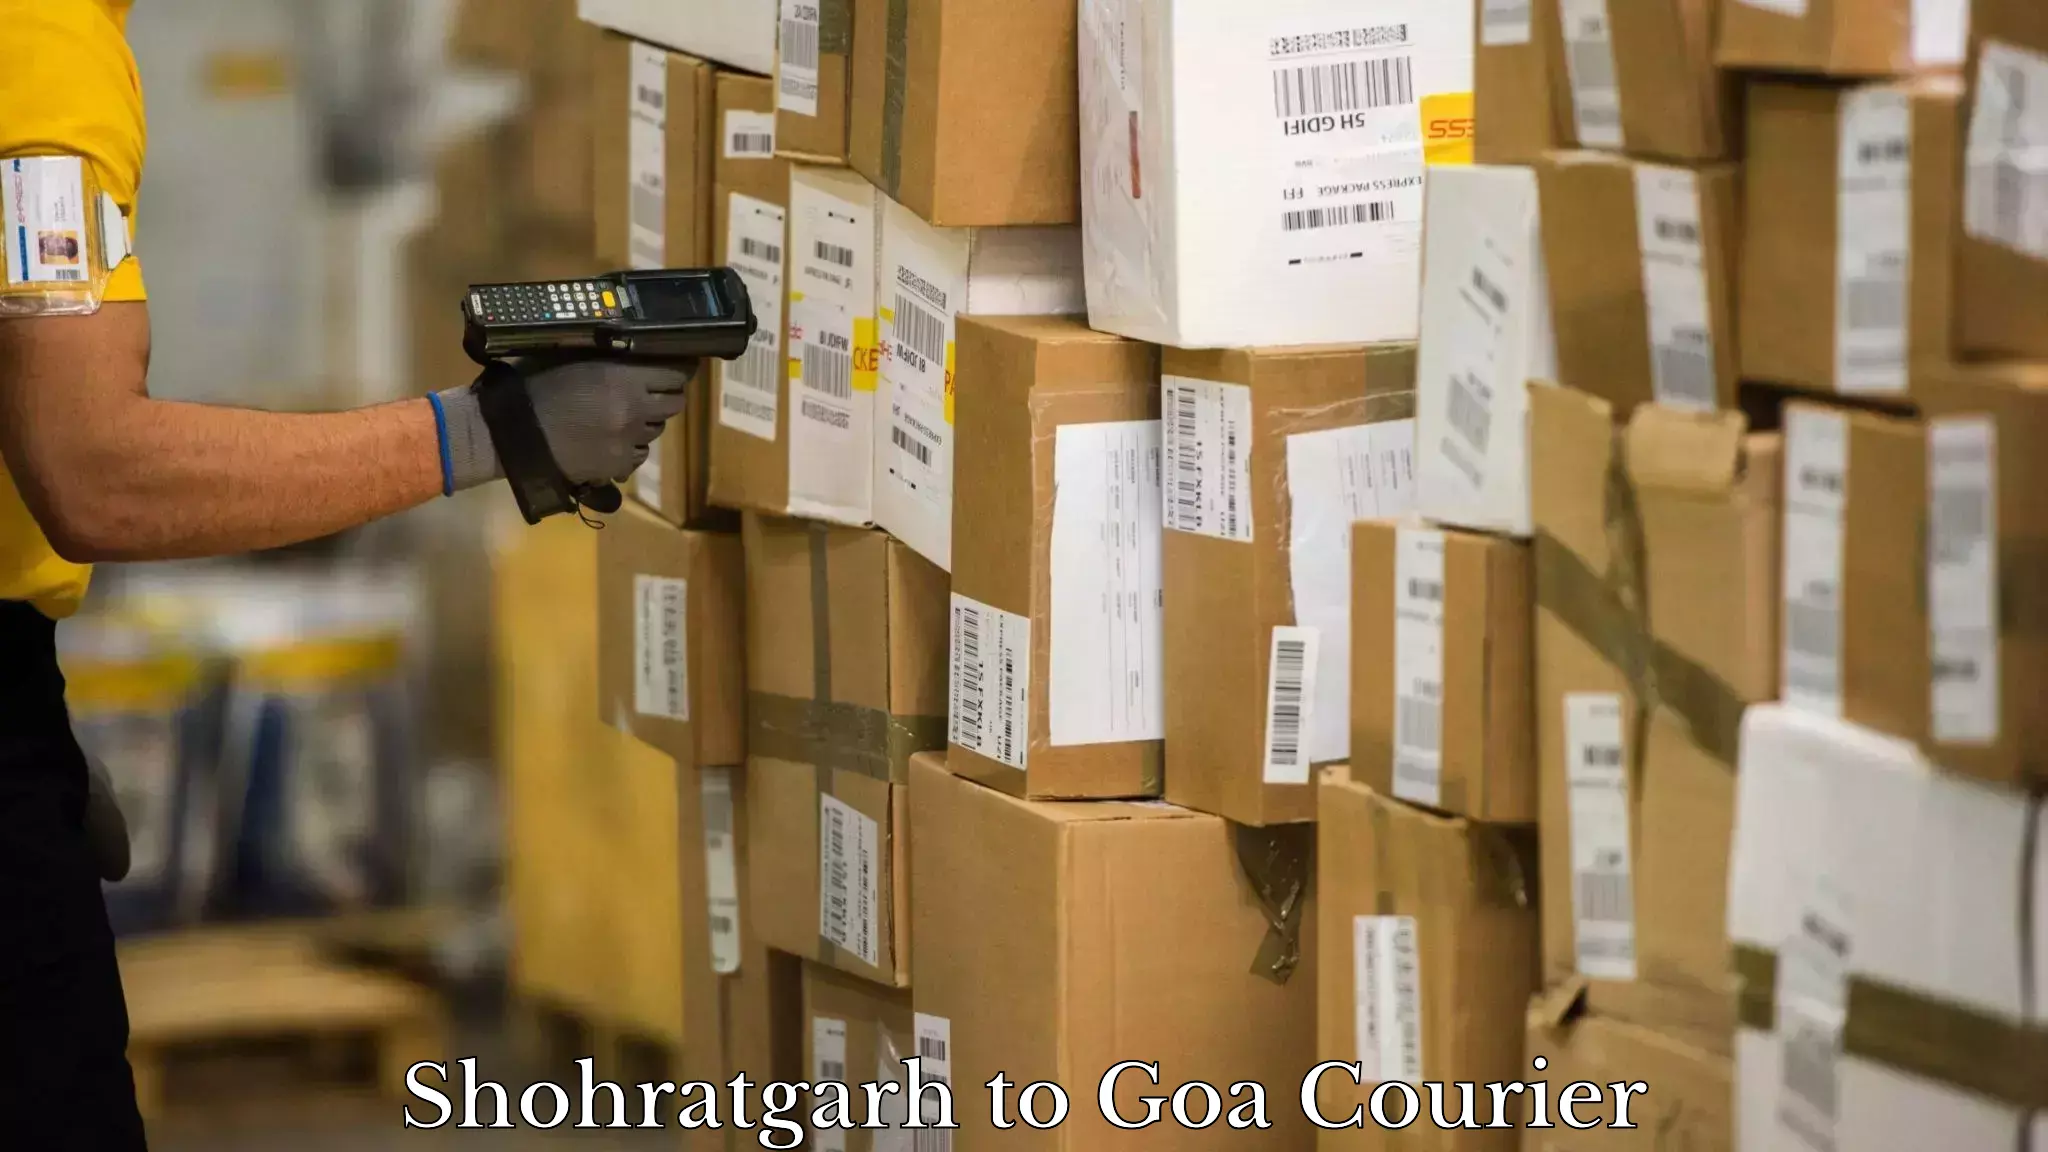 Global courier networks Shohratgarh to Goa